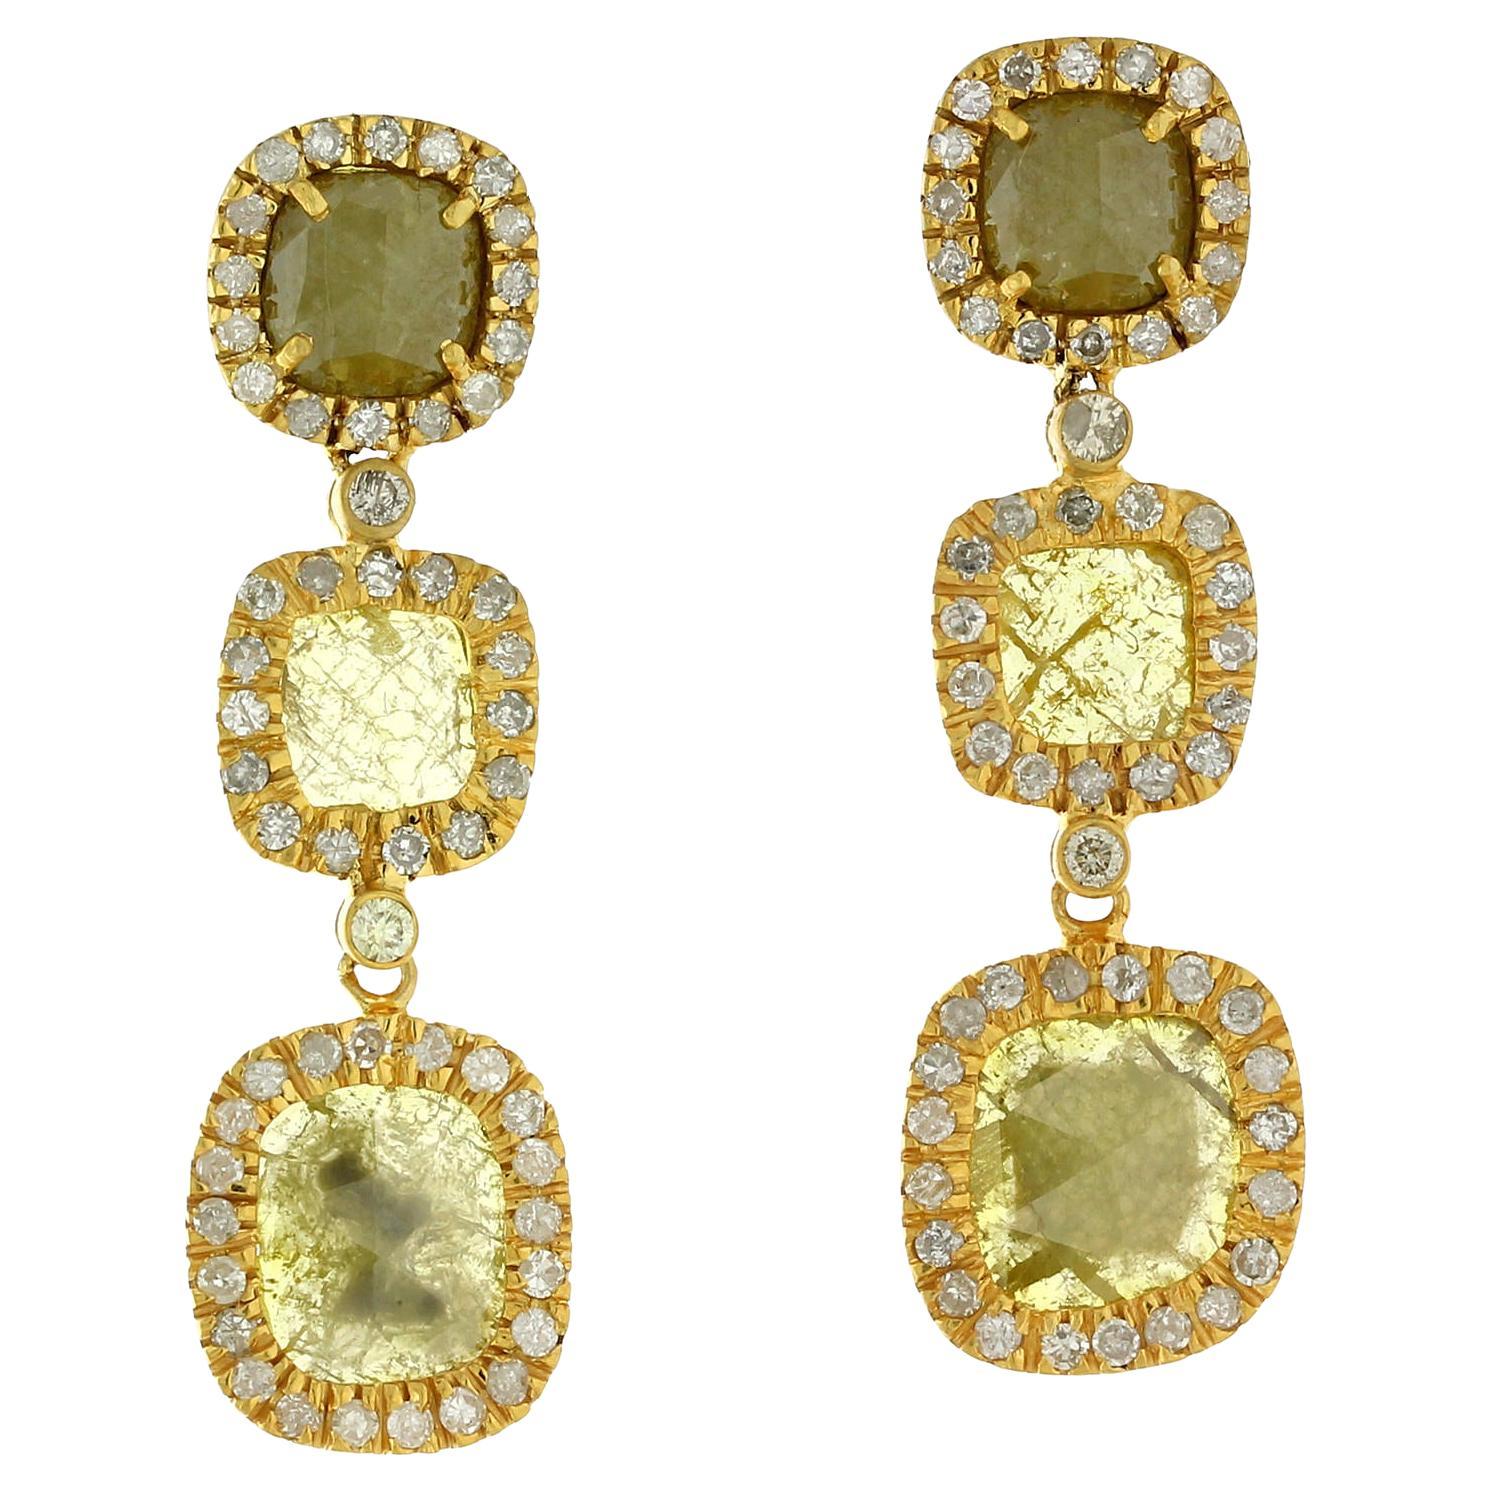 Multi Colored Cushion Shaped Sliced Ice Diamond Earrings Made in 18k Yellow Gold For Sale